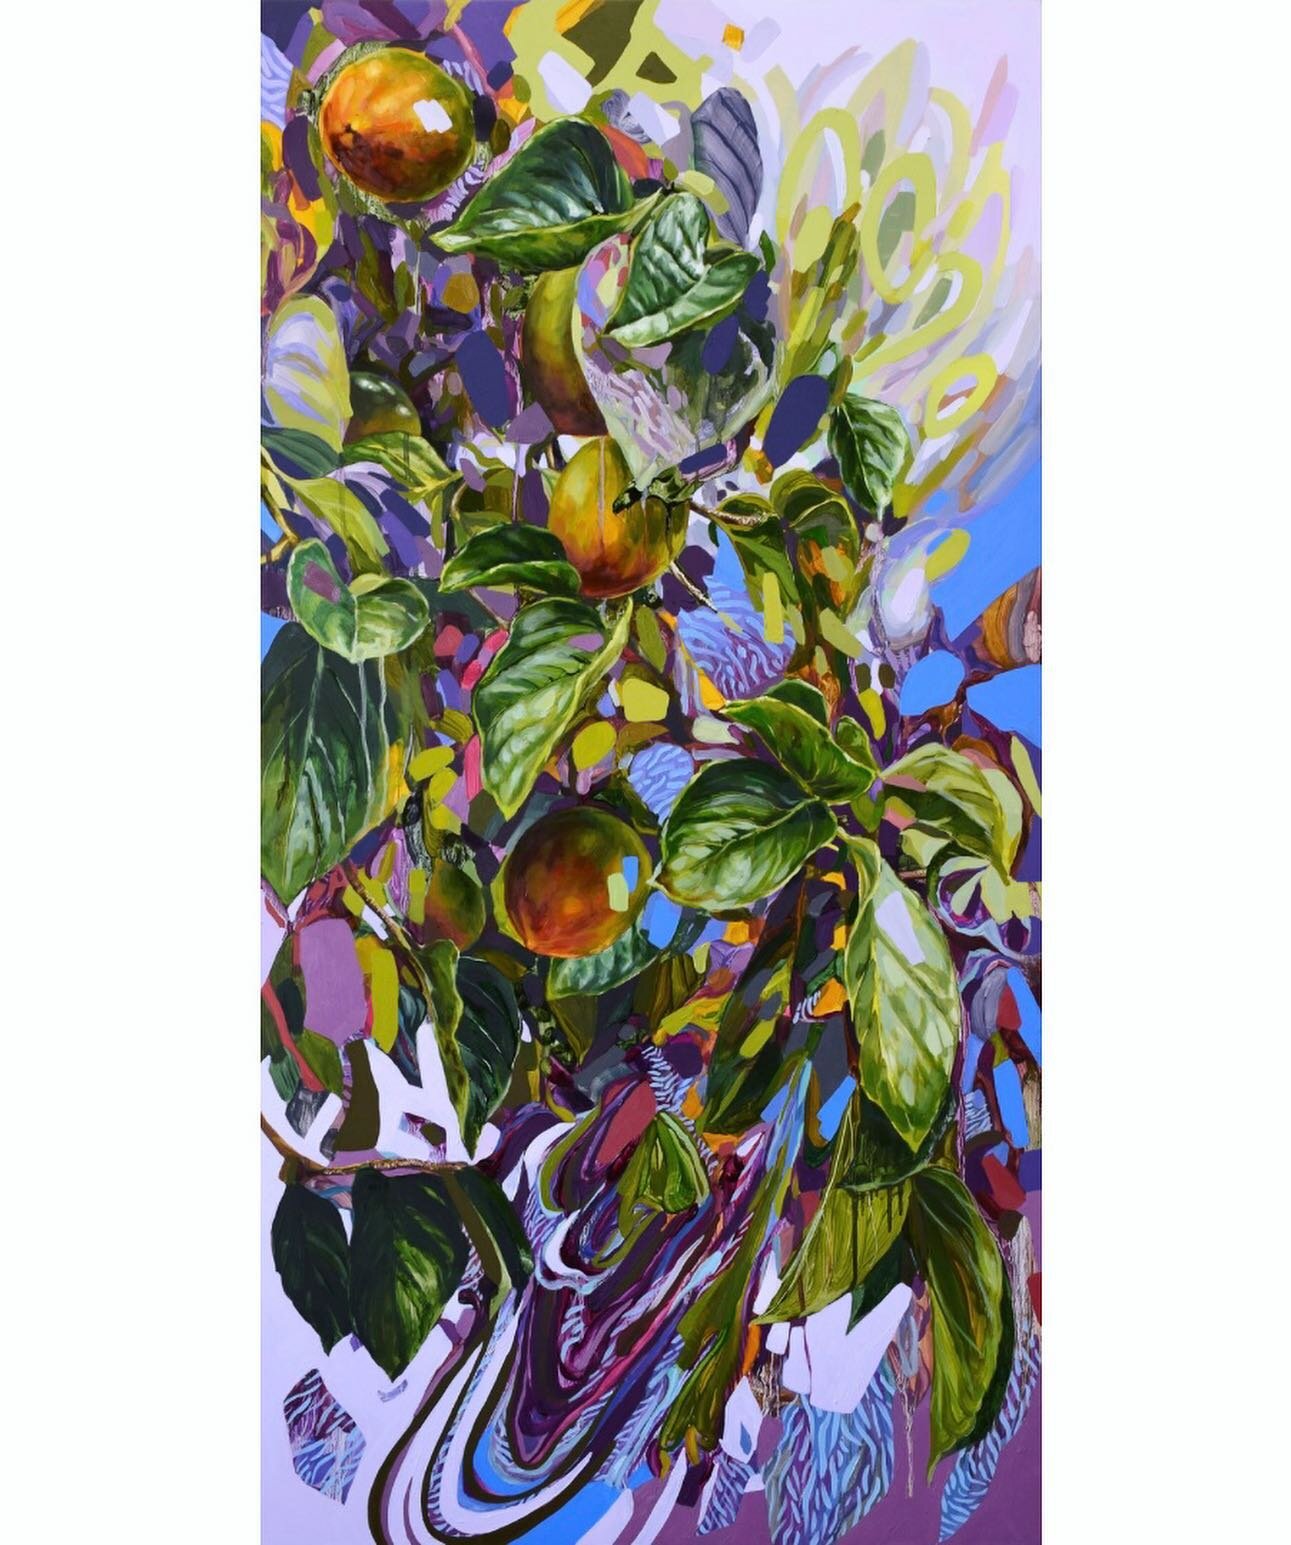 NEW WORK WORK WORK WORK
(swipe for juicy paint details)

Fragrant Fever Dream 
Oil on panel, 20x40in., 2023

#oilpainting #gardenpainting #gardens #painterly #dreams #persimmon #growth